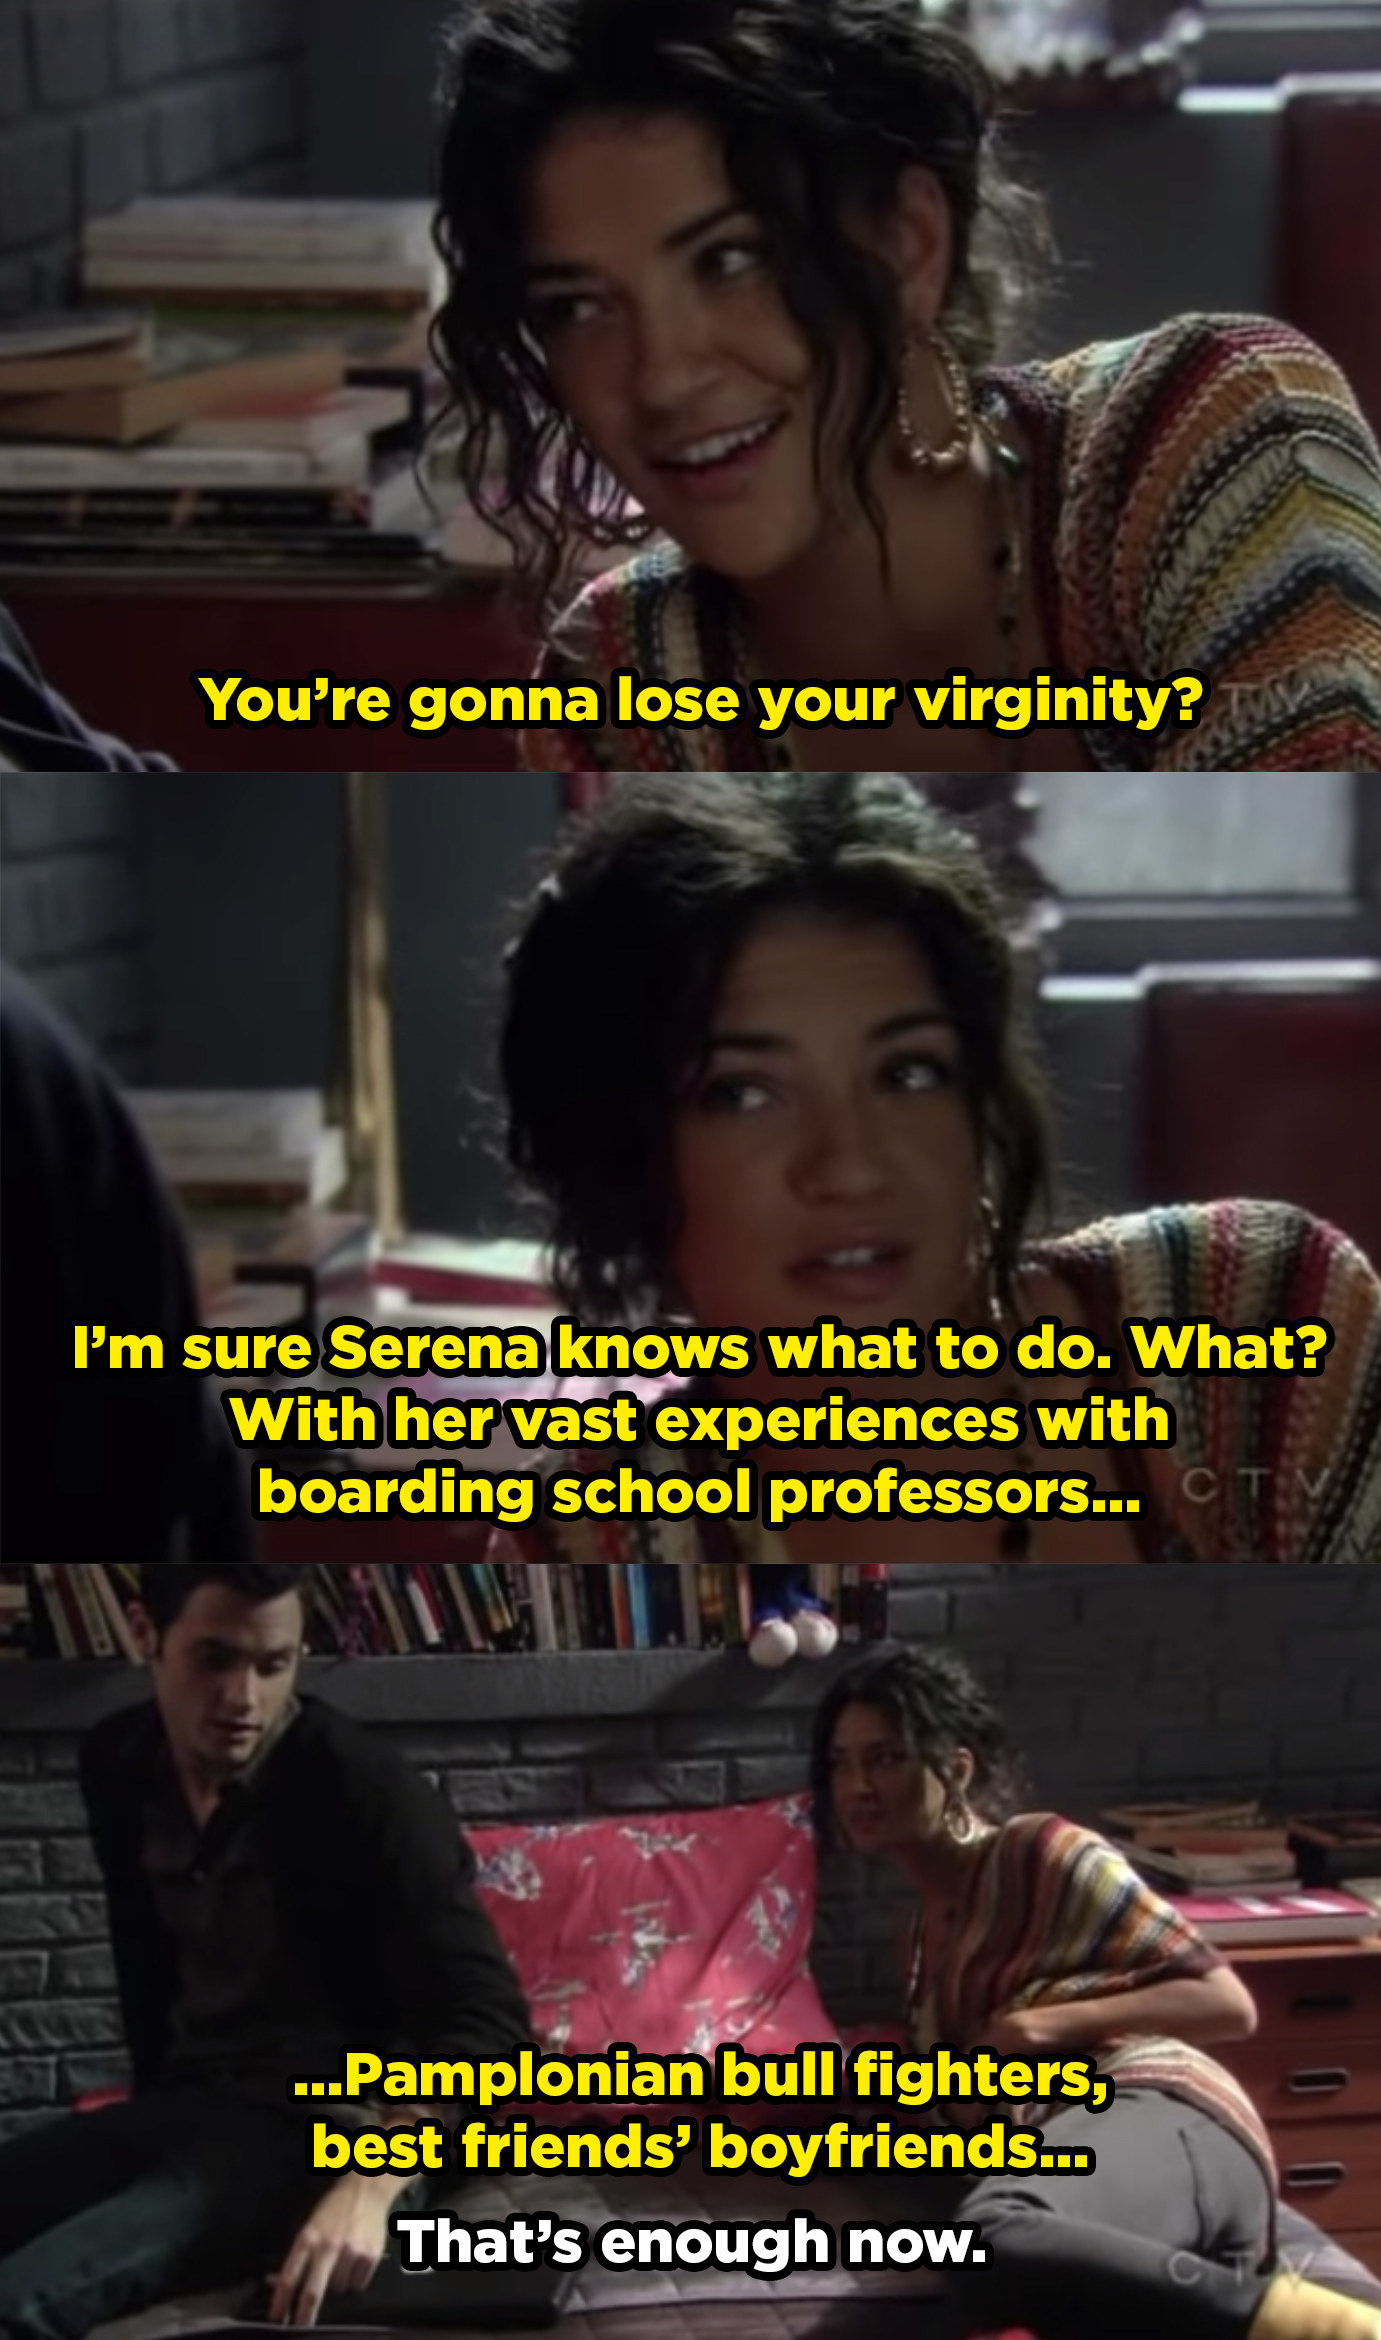 Vanessa slut-shaming Serena saying she probably has a lot of experience from hooking up with professors and her best friends&#x27; boyfriends.